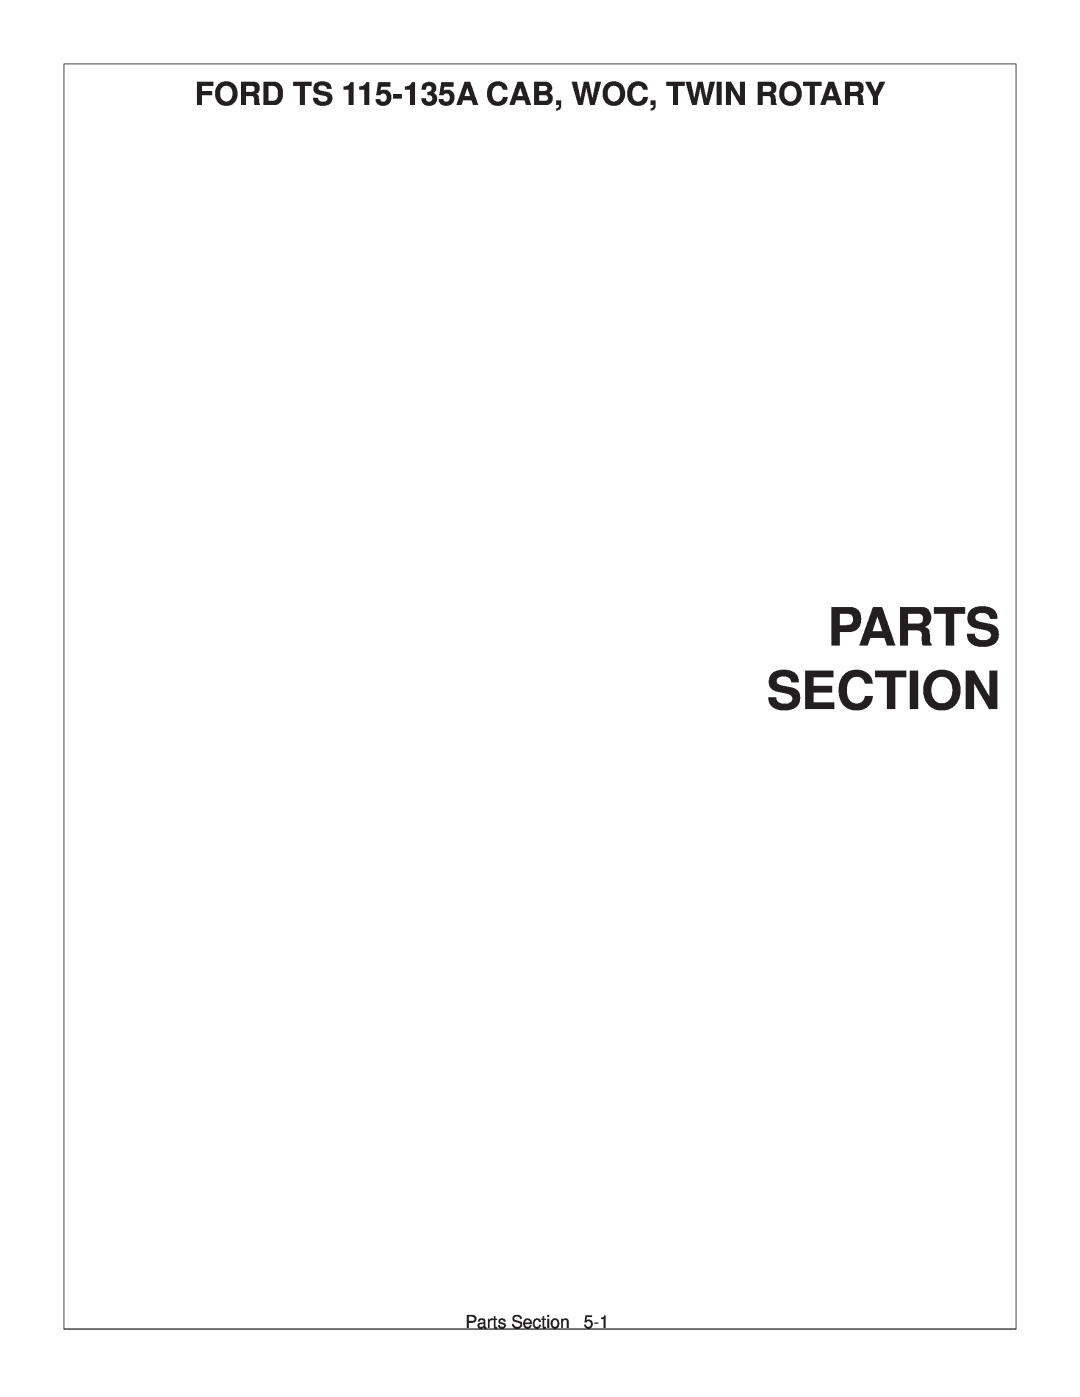 Tiger Products Co., Ltd 6020009 manual Parts Section, FORD TS 115-135A CAB, WOC, TWIN ROTARY 